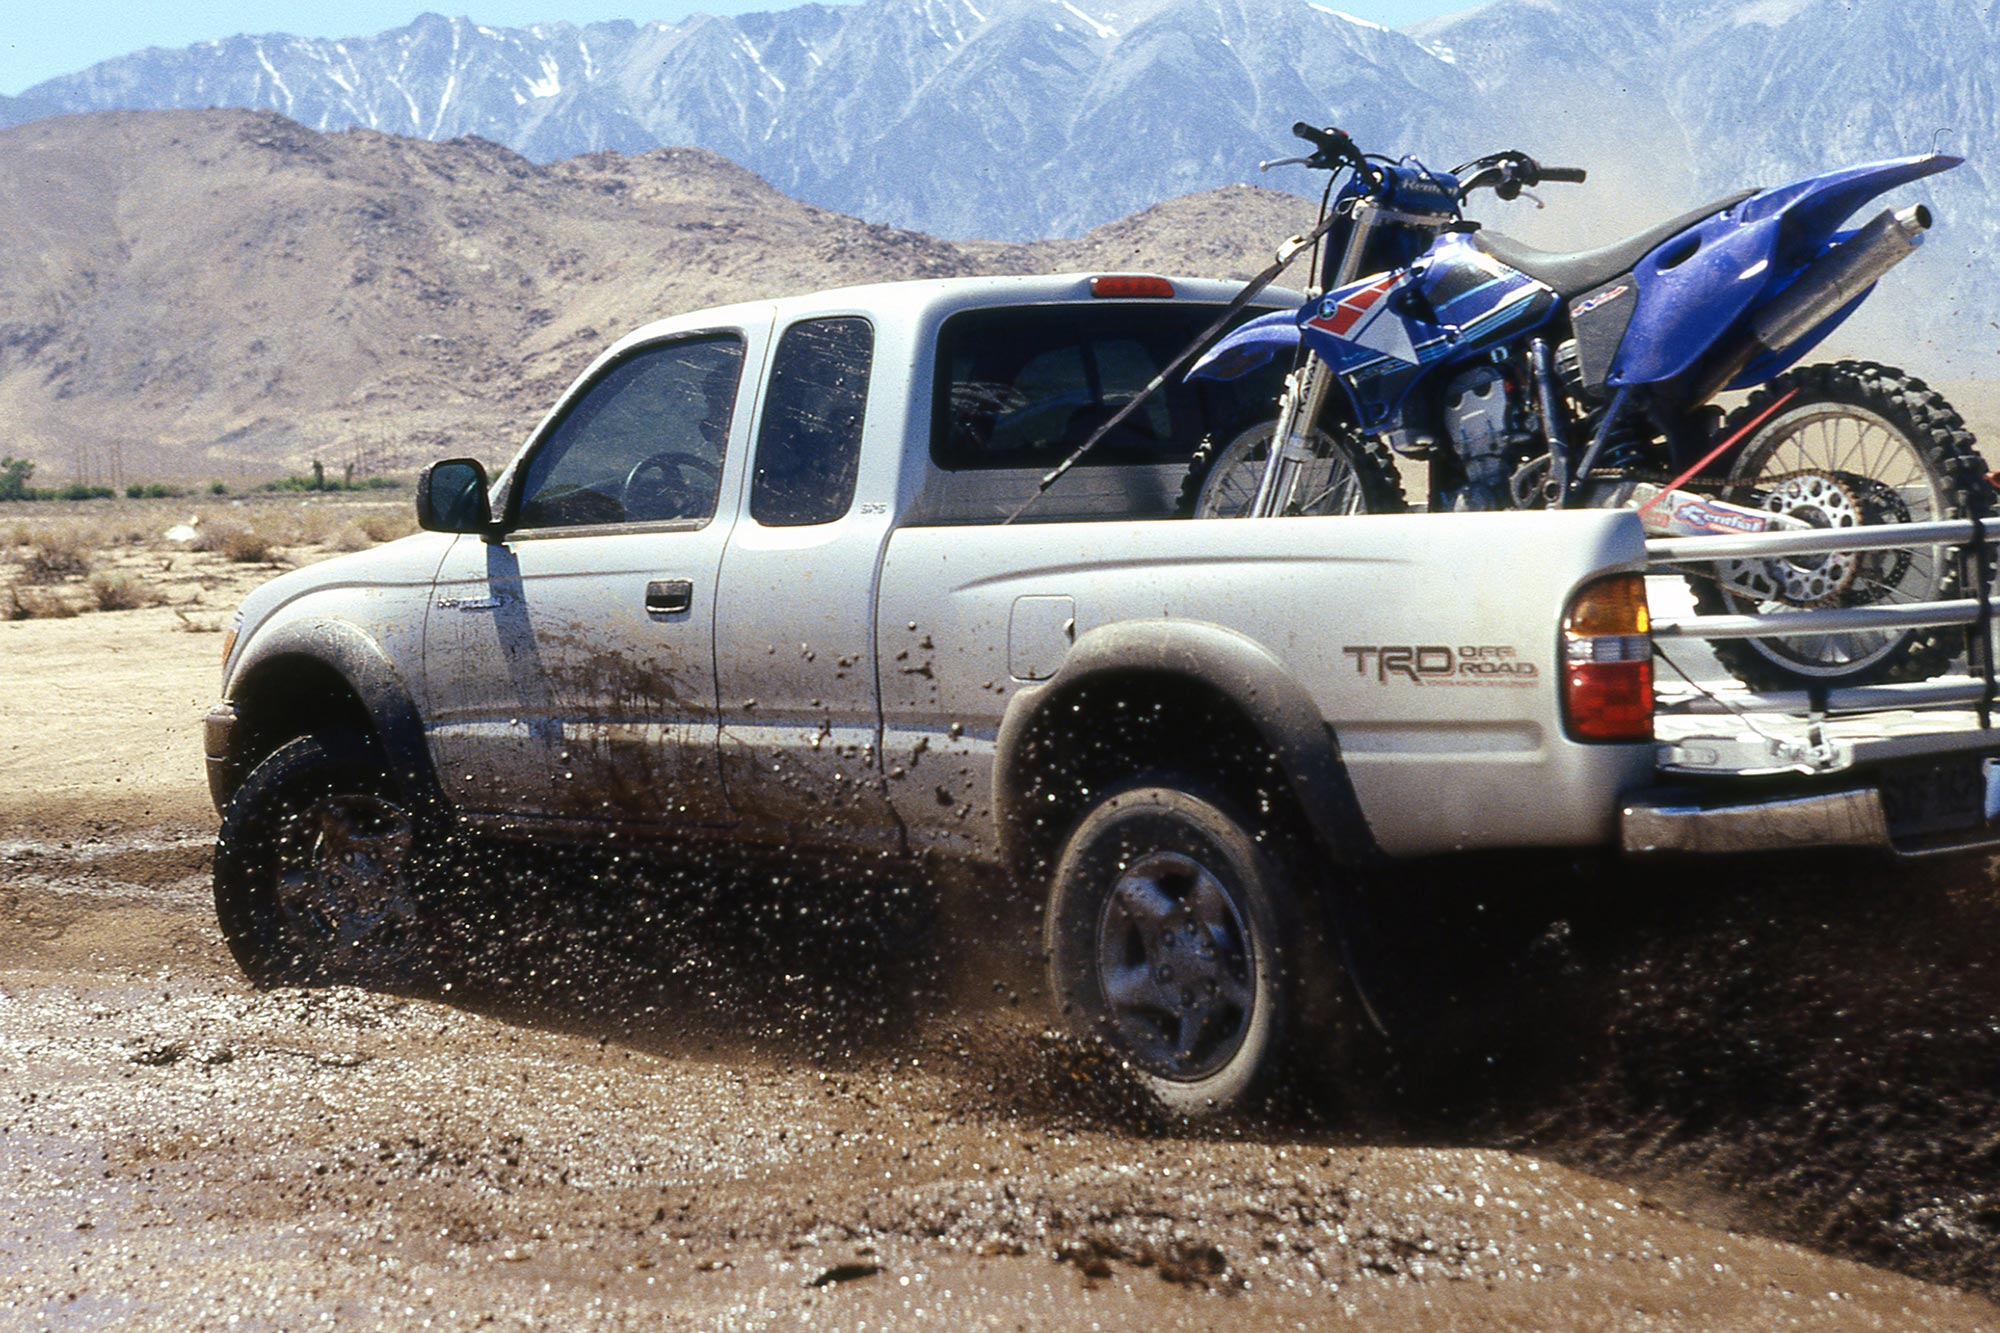 mid-1990s Toyota Tacoma driving through mud with motorcycle in bed.